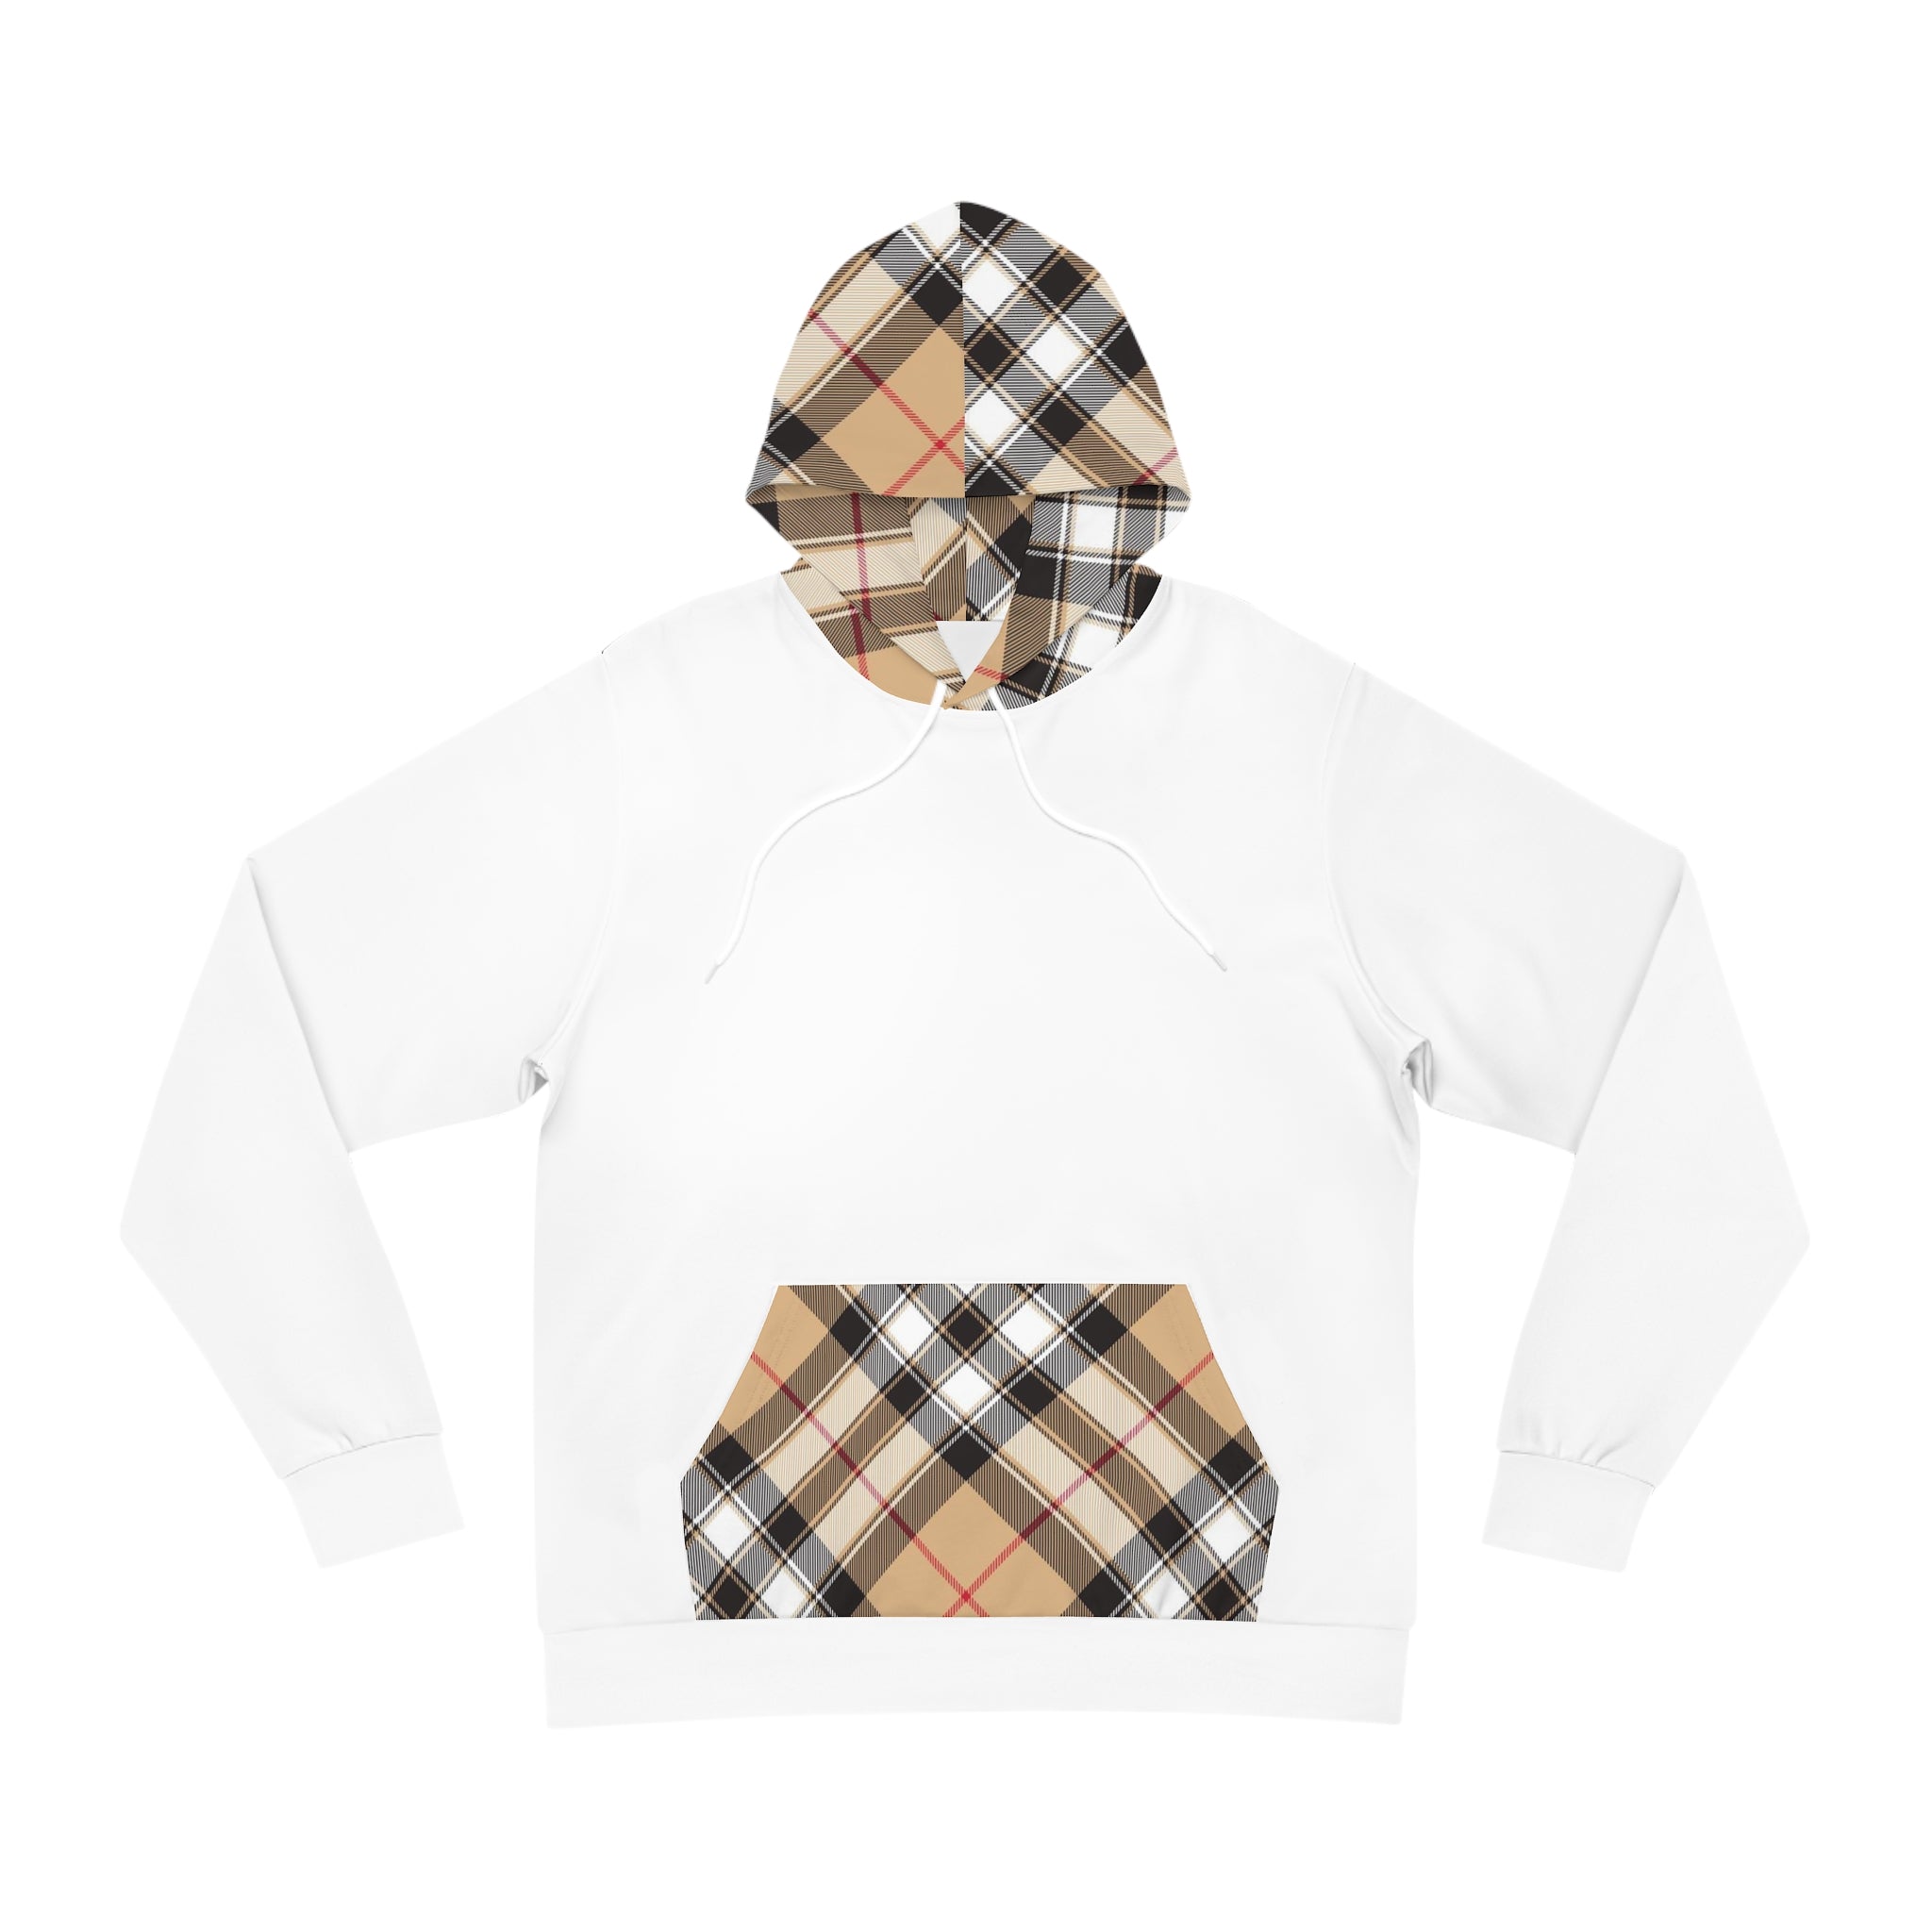  Groove Collection in Plaid (Red Line) Large Print Hood and Pocket Contrast Pullover Fashion Hoodie in White, Men's Plaid Contrast Hoodie HoodieLSeamthreadcolorautomaticallymatchedtodesign